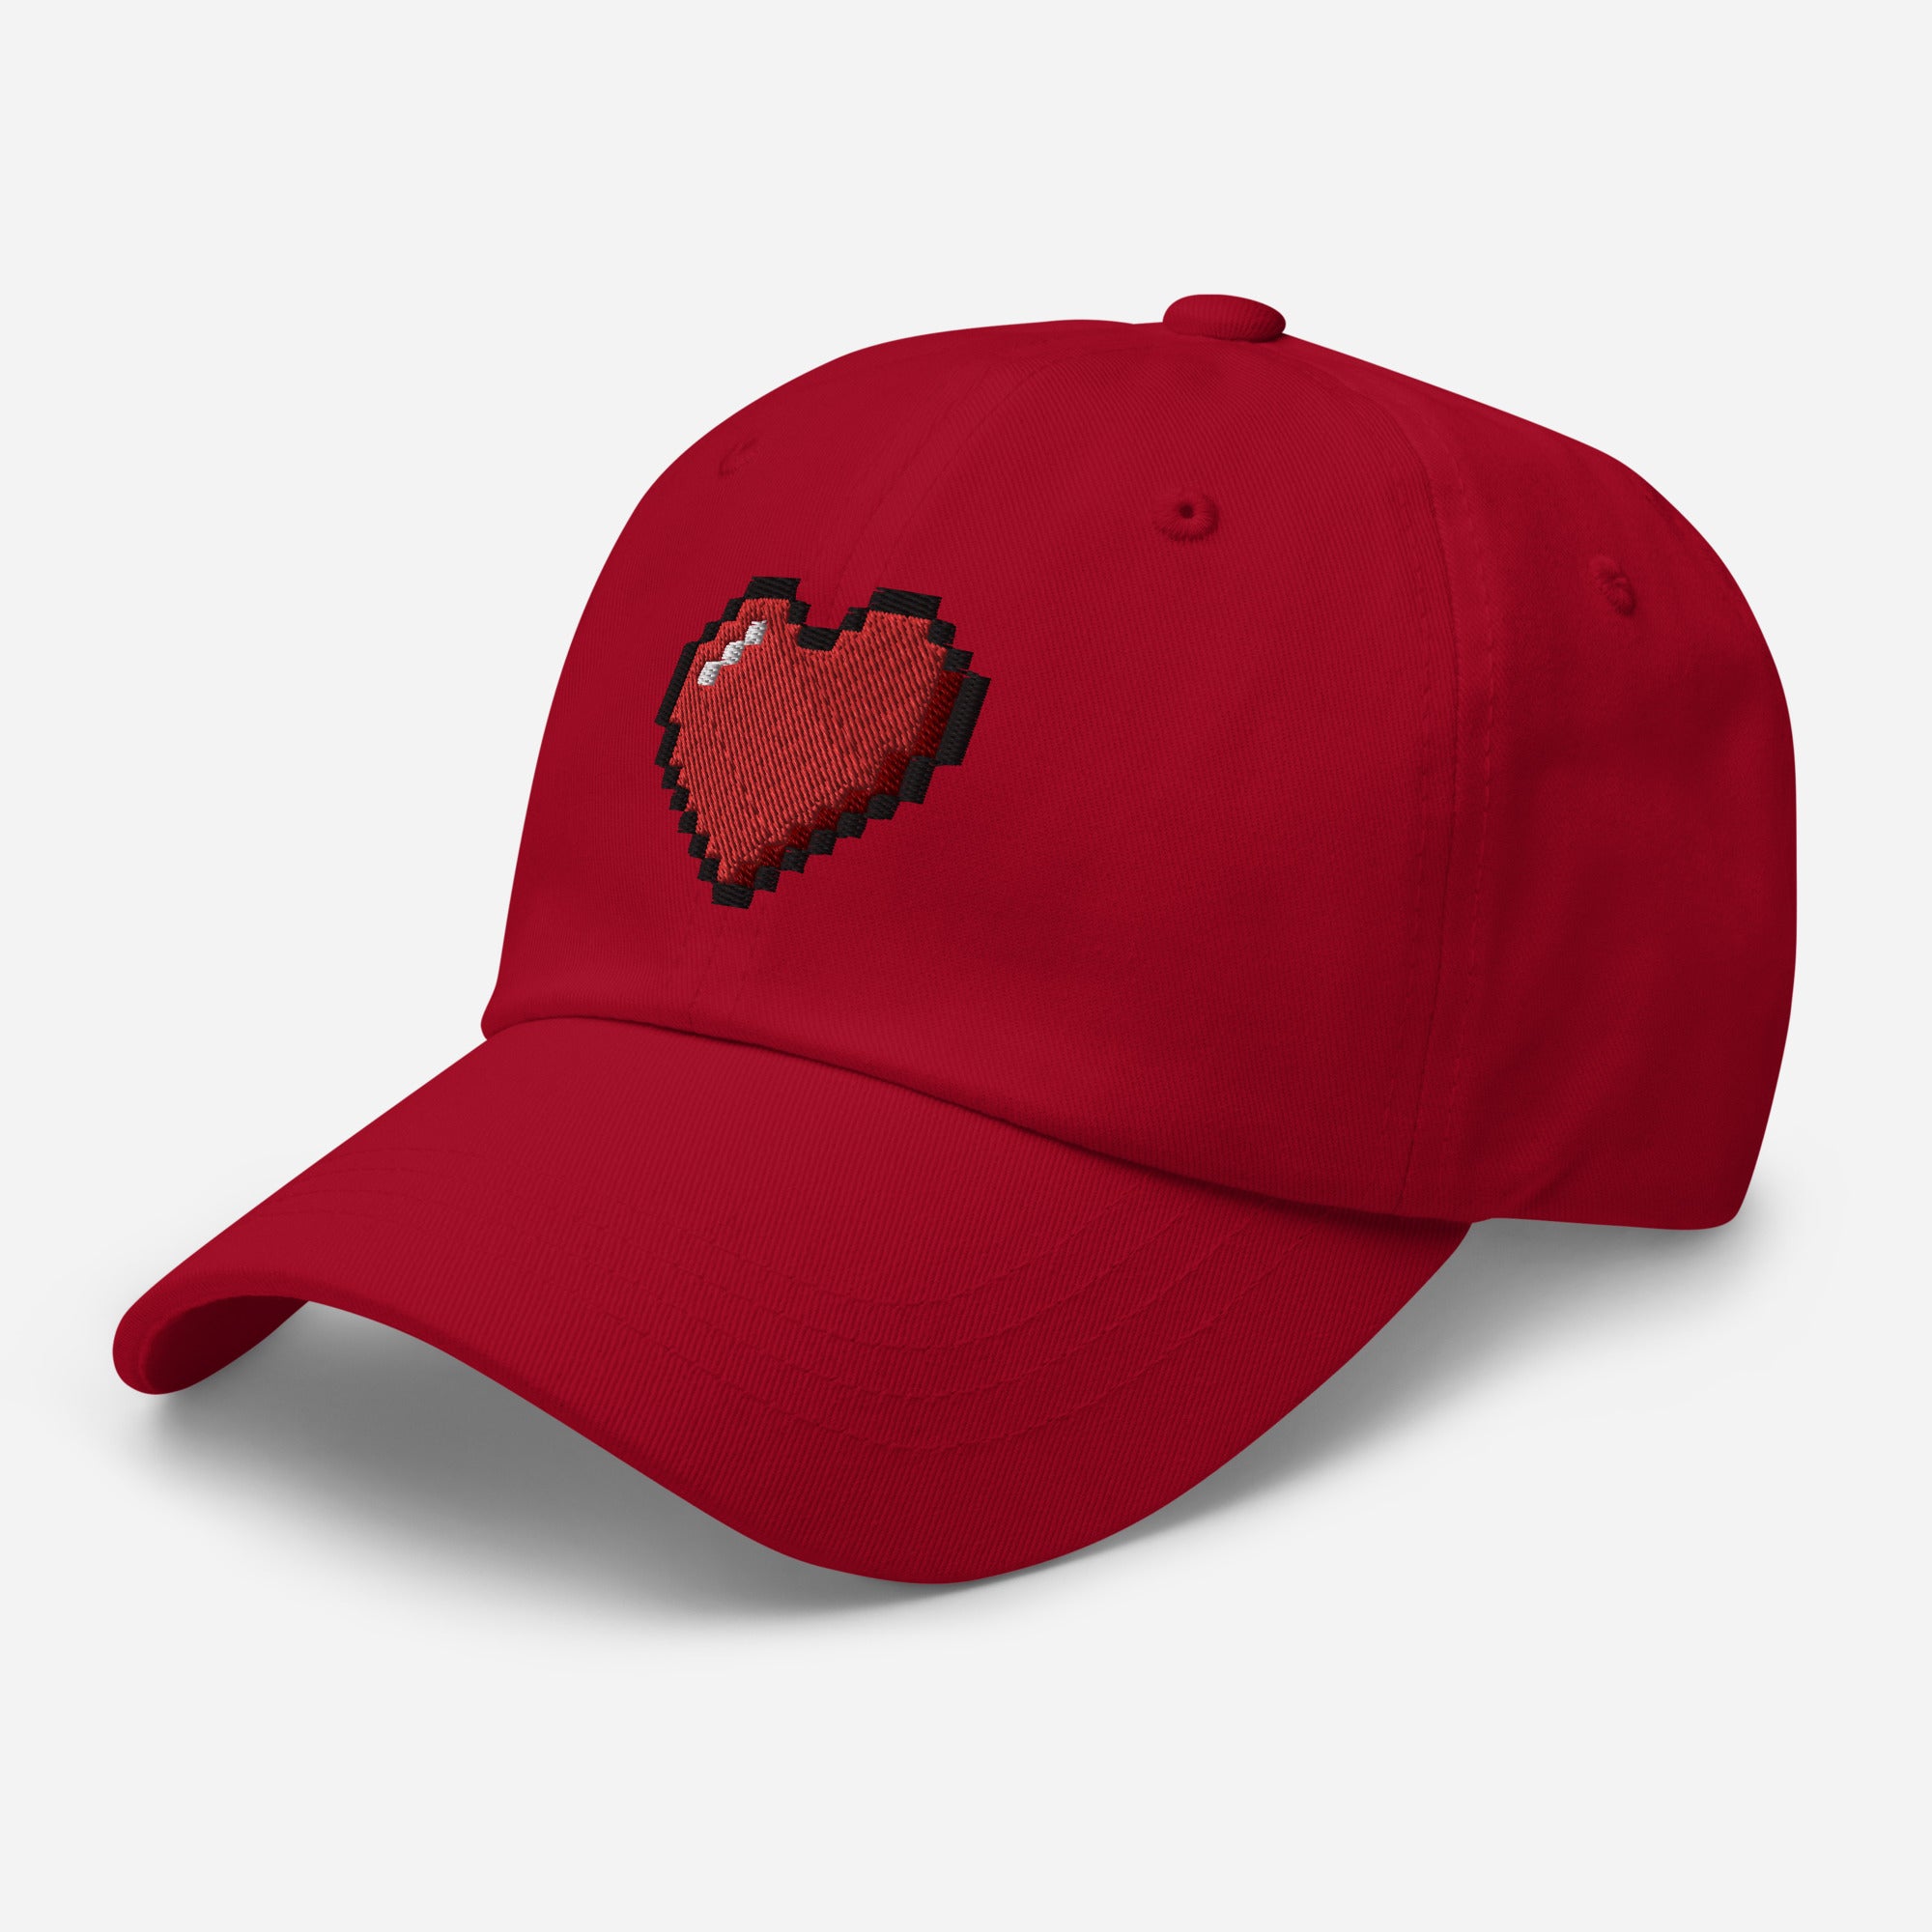 Retro 8 Bit Video Game Pixelated Heart Embroidered Baseball Cap Dad hat